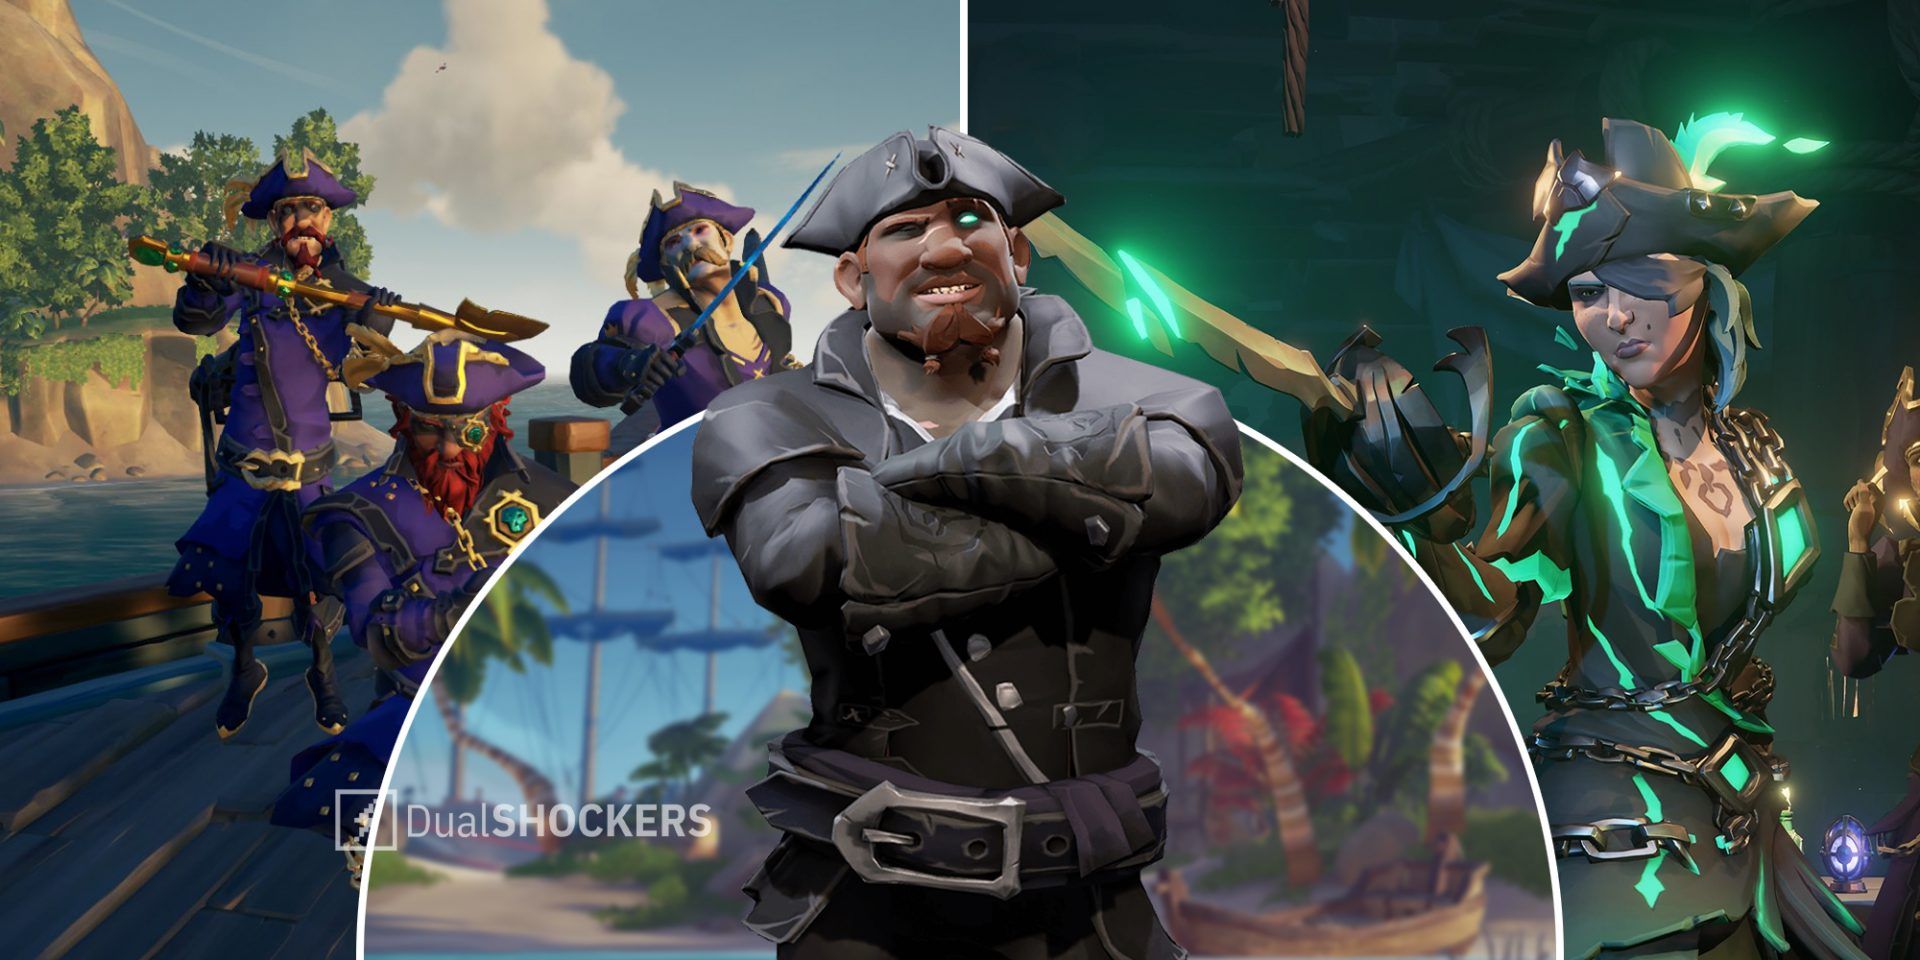 Sea of Thieves players with legendary set outfits on left, Mysterious Stranger in middle, pirate on right